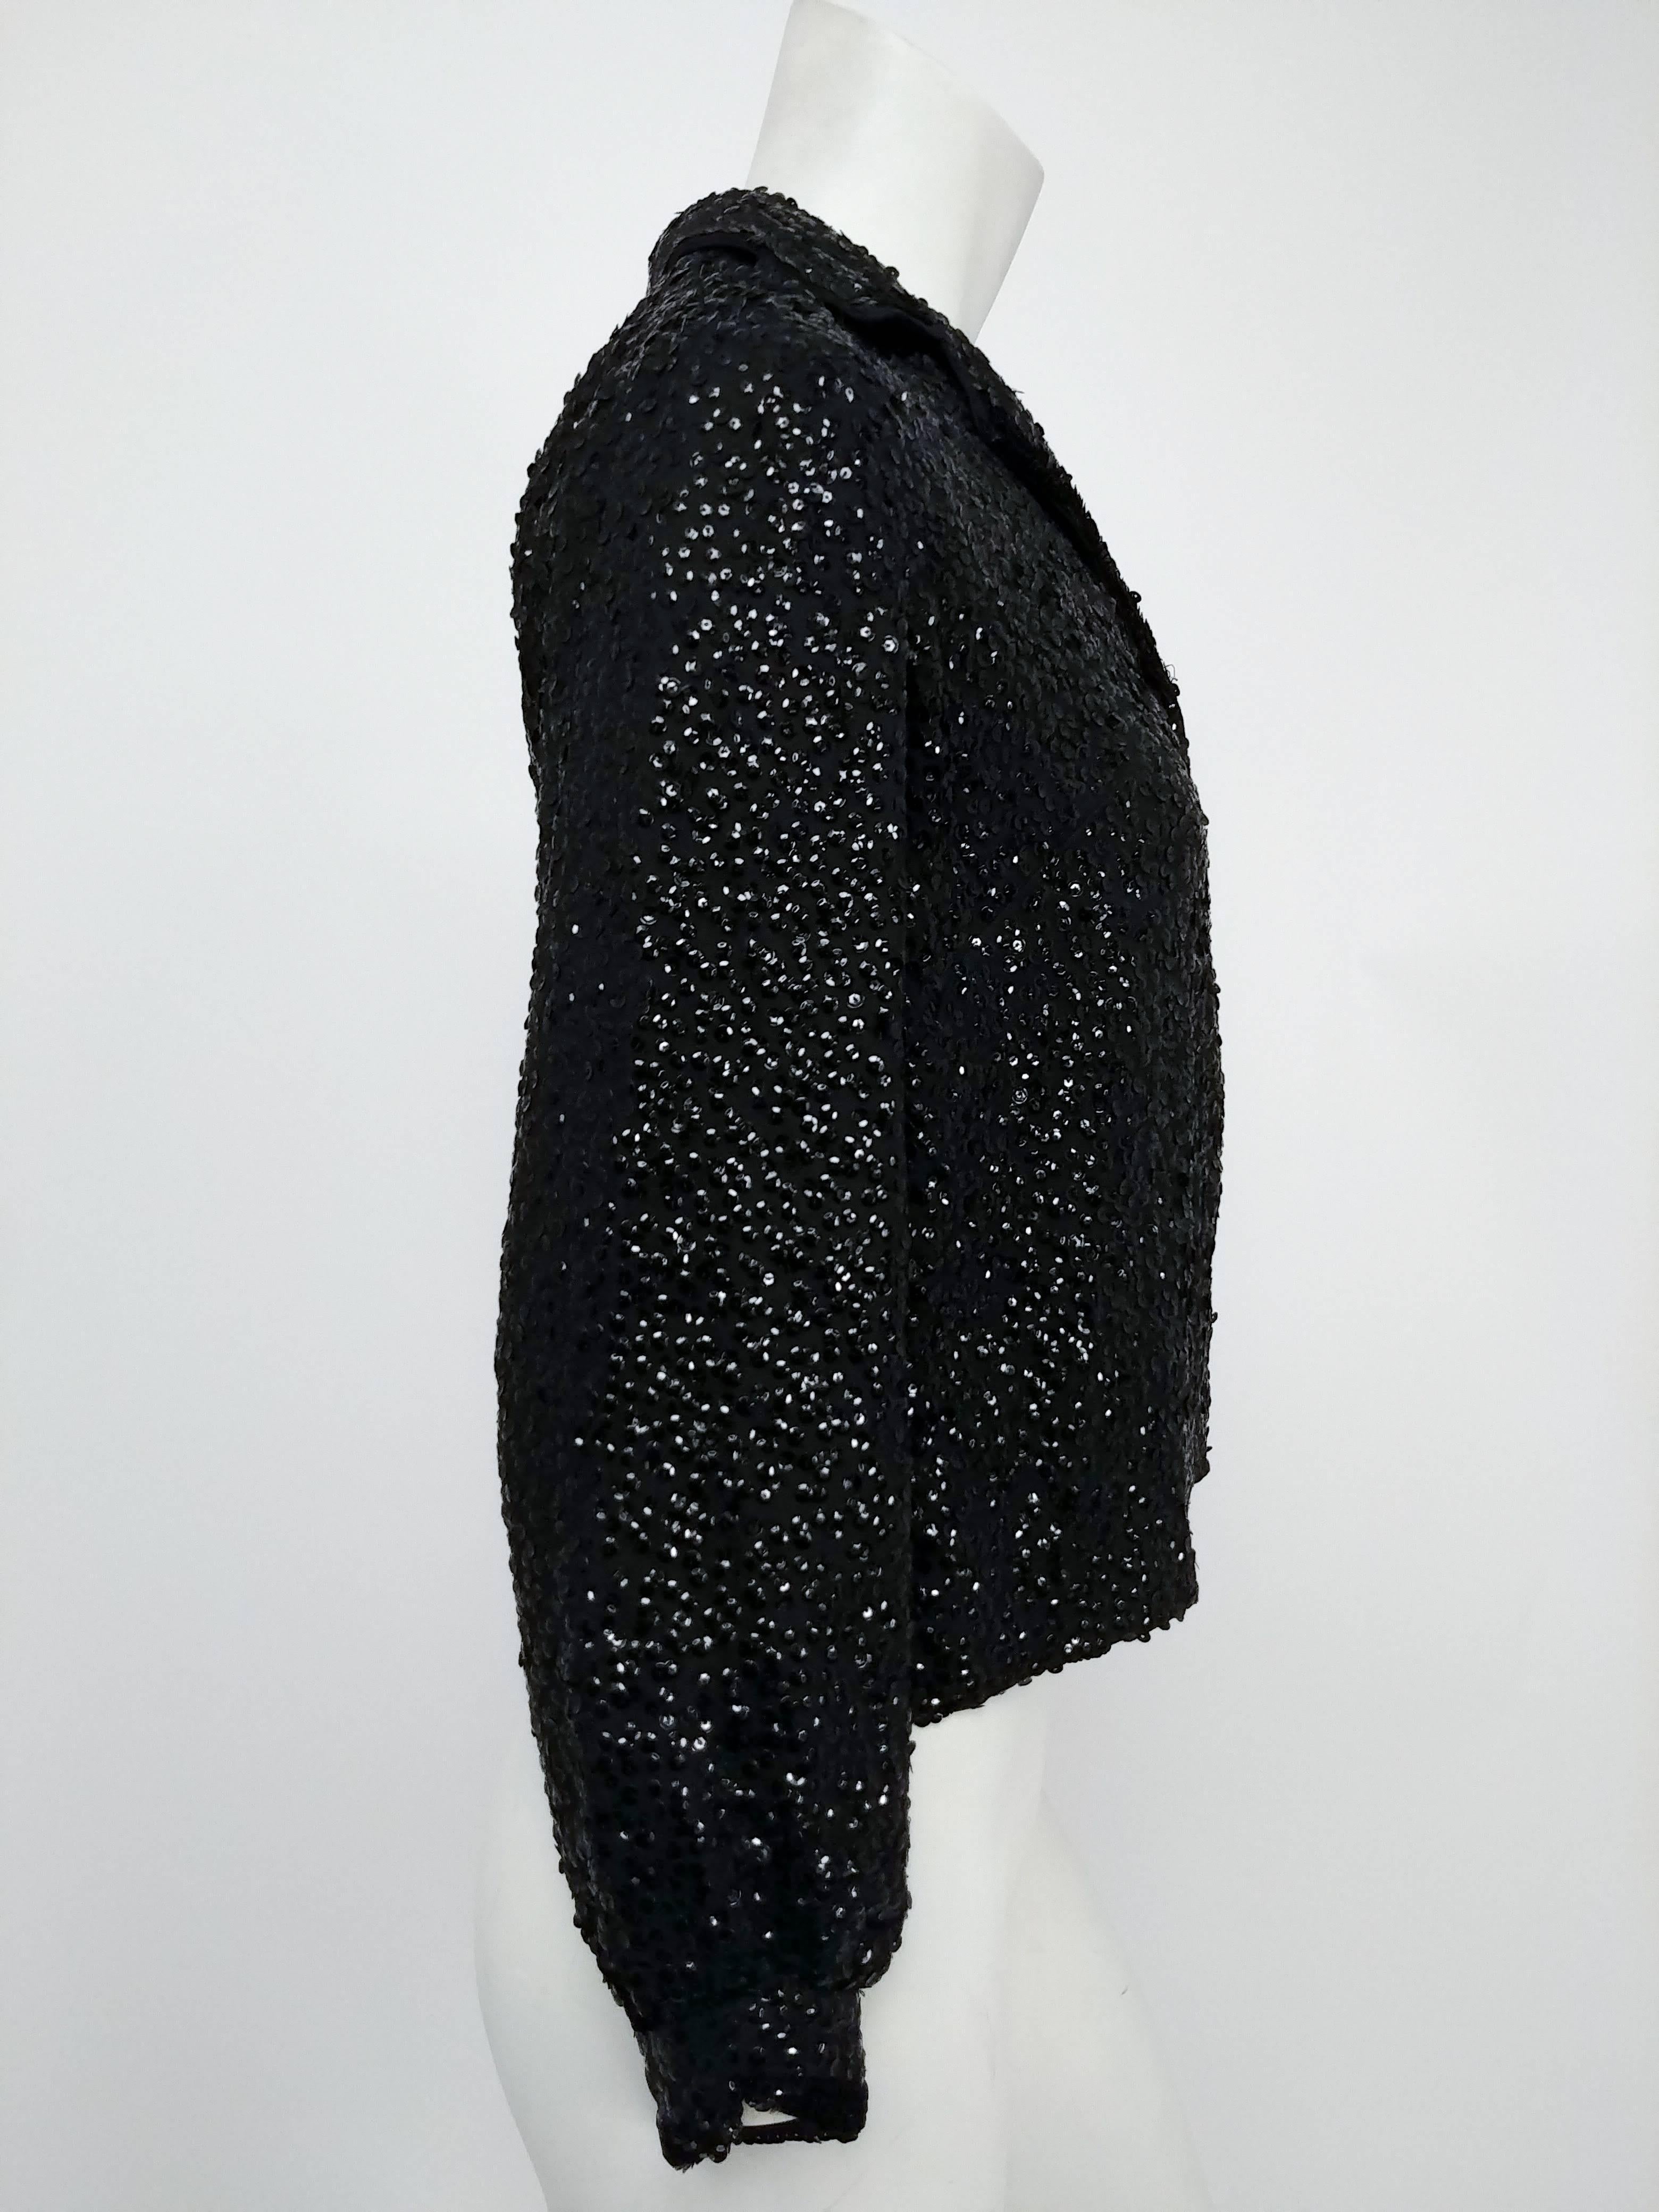 1950s Black All-Over Sequin Jacket.  Classy black notched collar evening jacket, buttons down front, fully lined. 